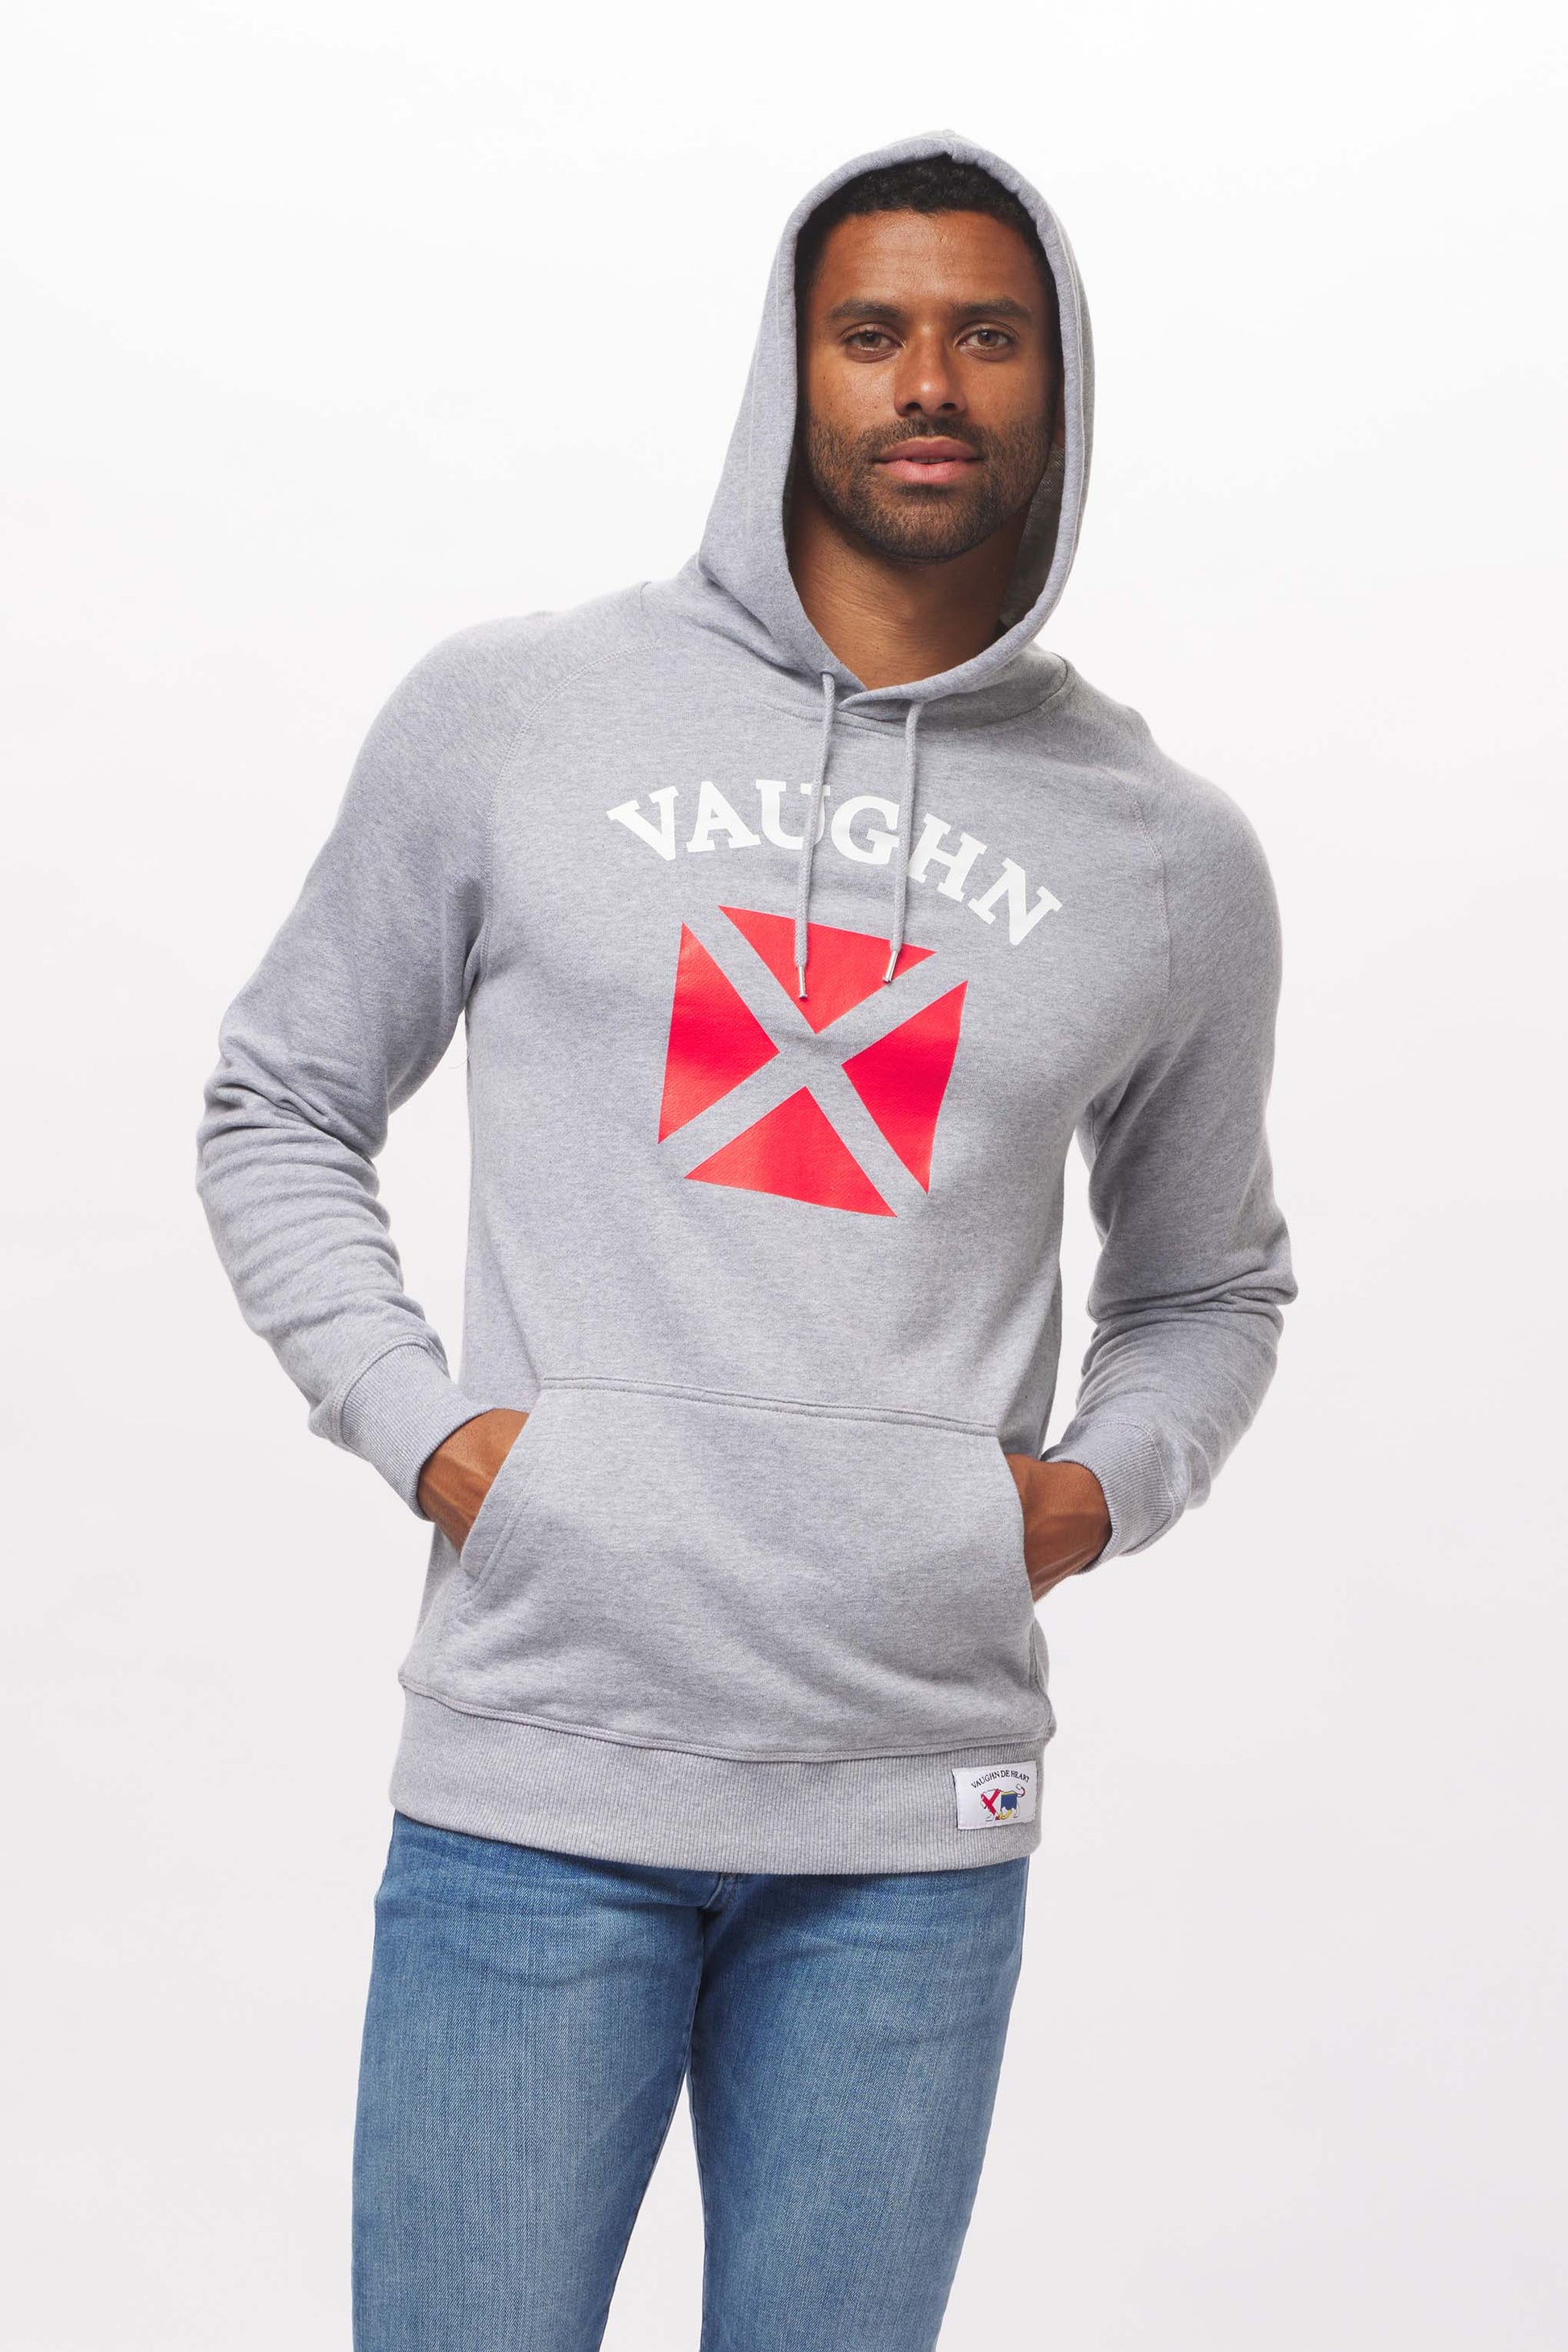 Men's - Voilier - Heather Grey V Nautical Flag Pullover Hoodie